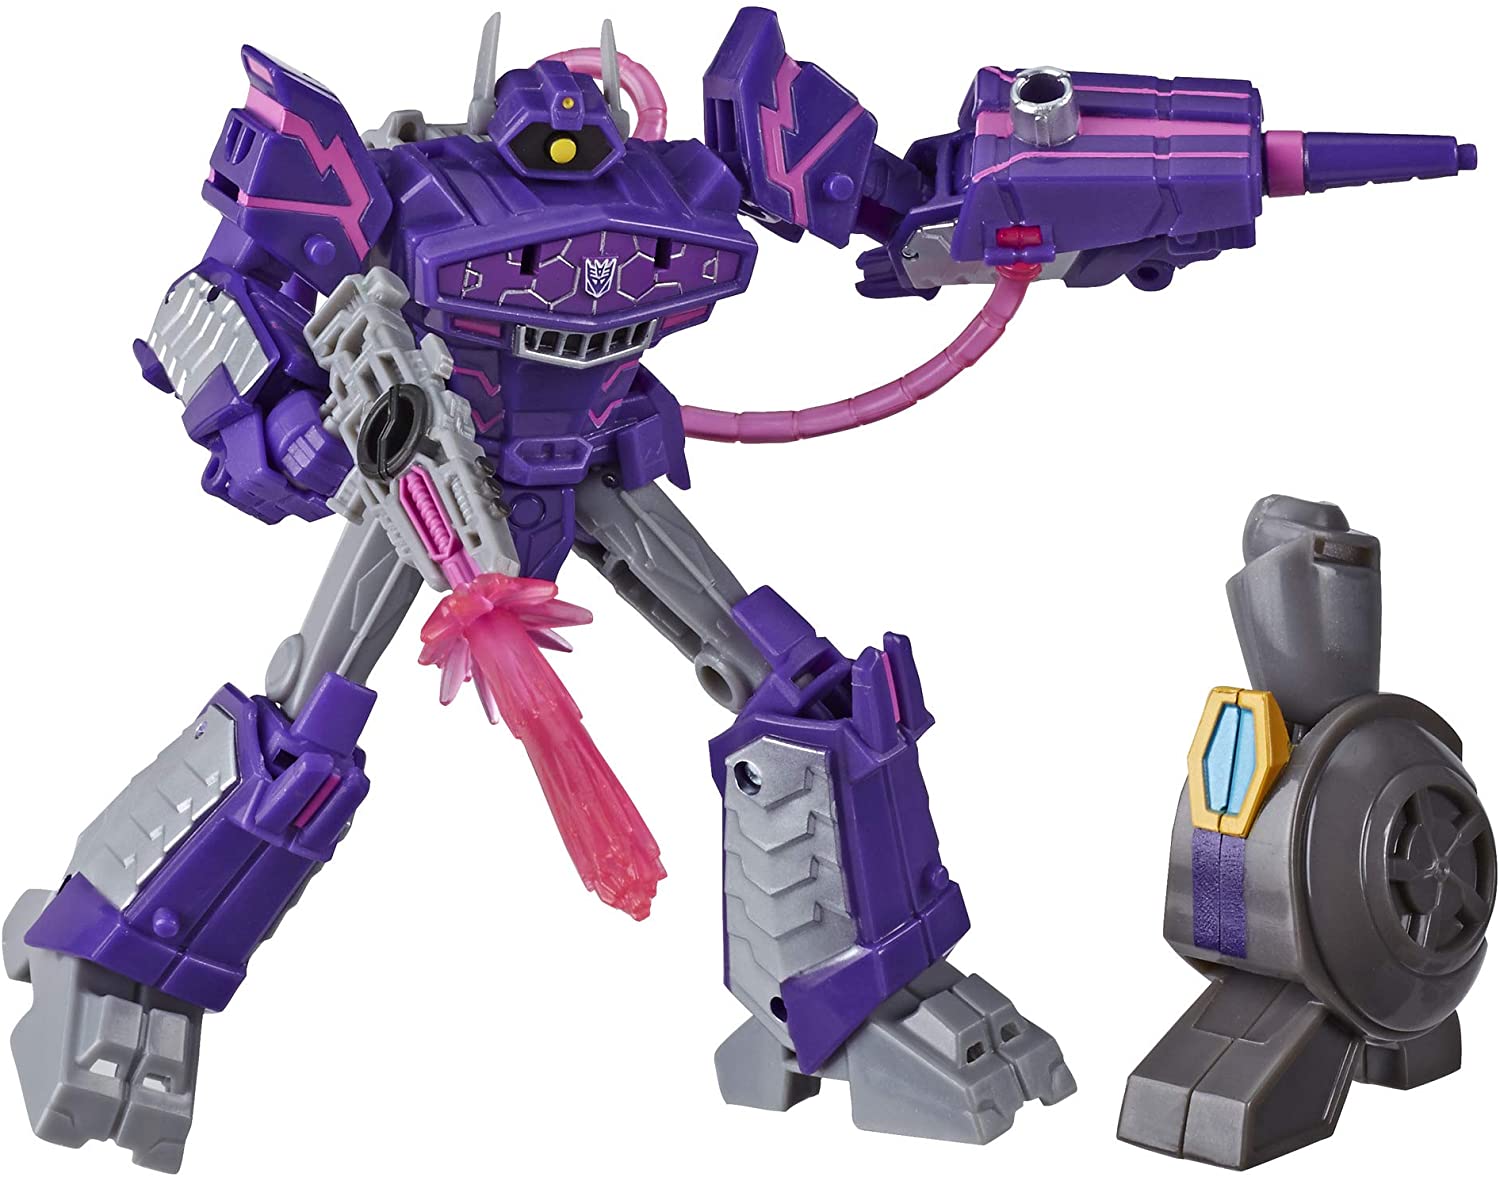 Transformers Toys Cyberverse Deluxe Class Shockwave Action Figure, Shock Bl